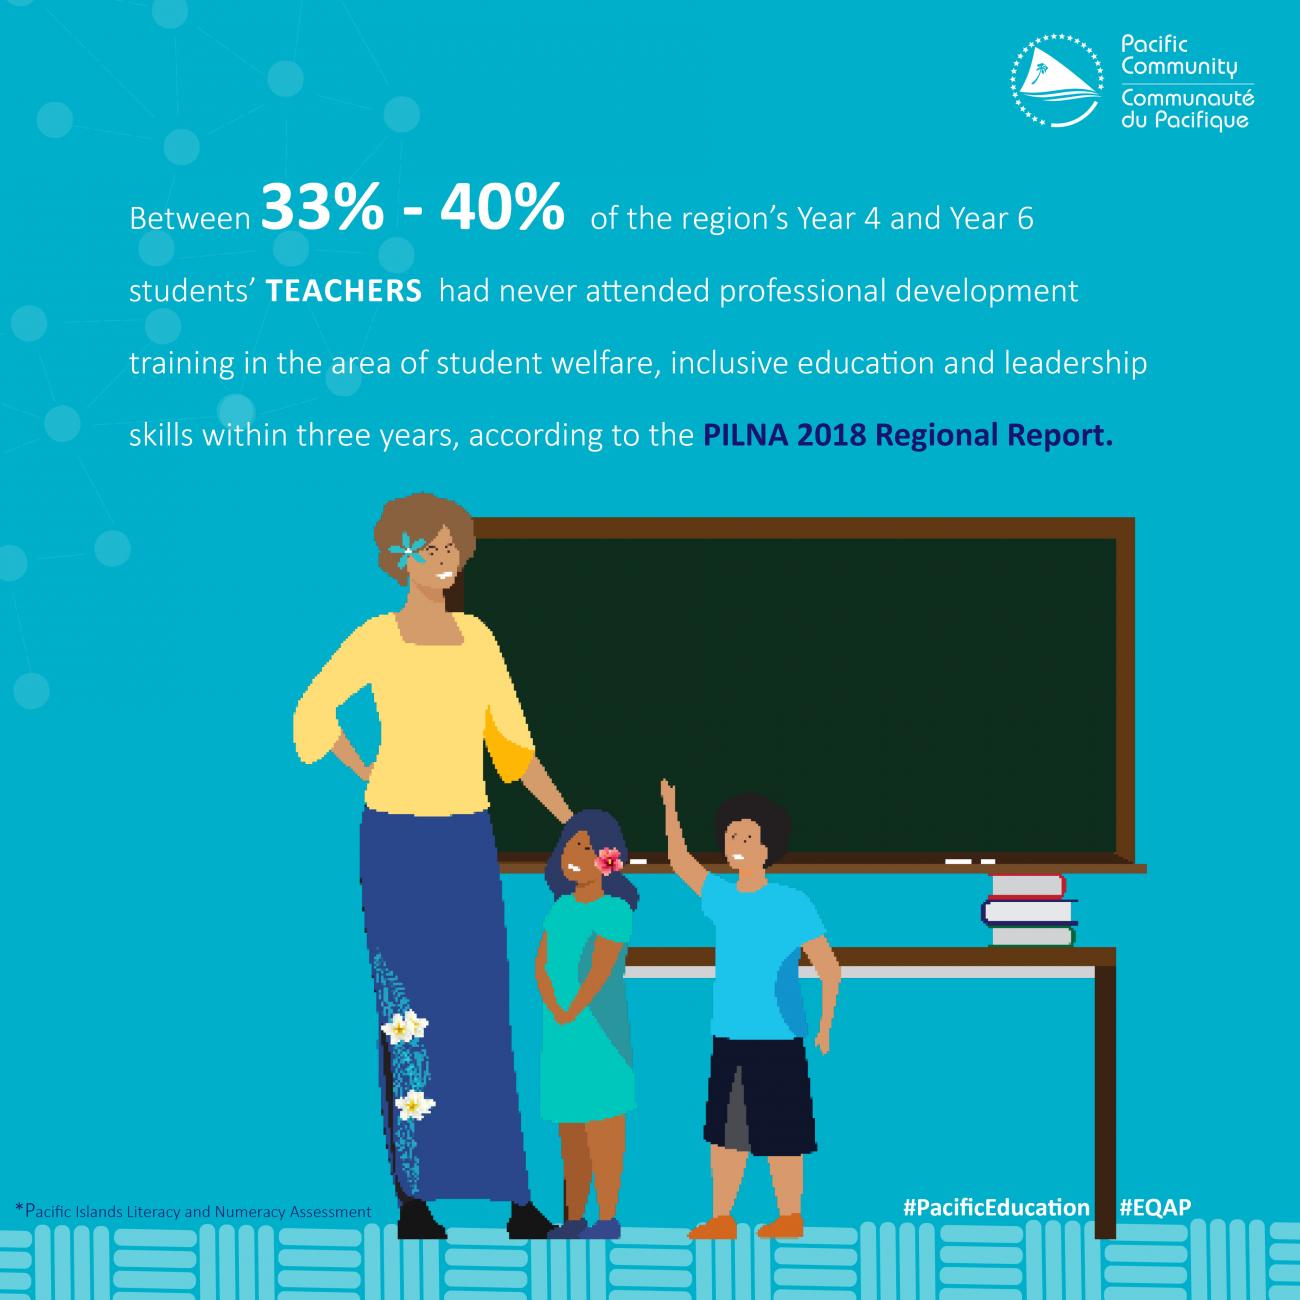 Between 33% - 40% of the region's Year 4 and Year 6 students' teachers had never attended a professional training in the area of student welfare, inclusive education and leadership skills within three years, according to the PILNA 2018 research. *Pacific Islands Literacy and Numeracy Assessment. #EQAP #PacificEducation